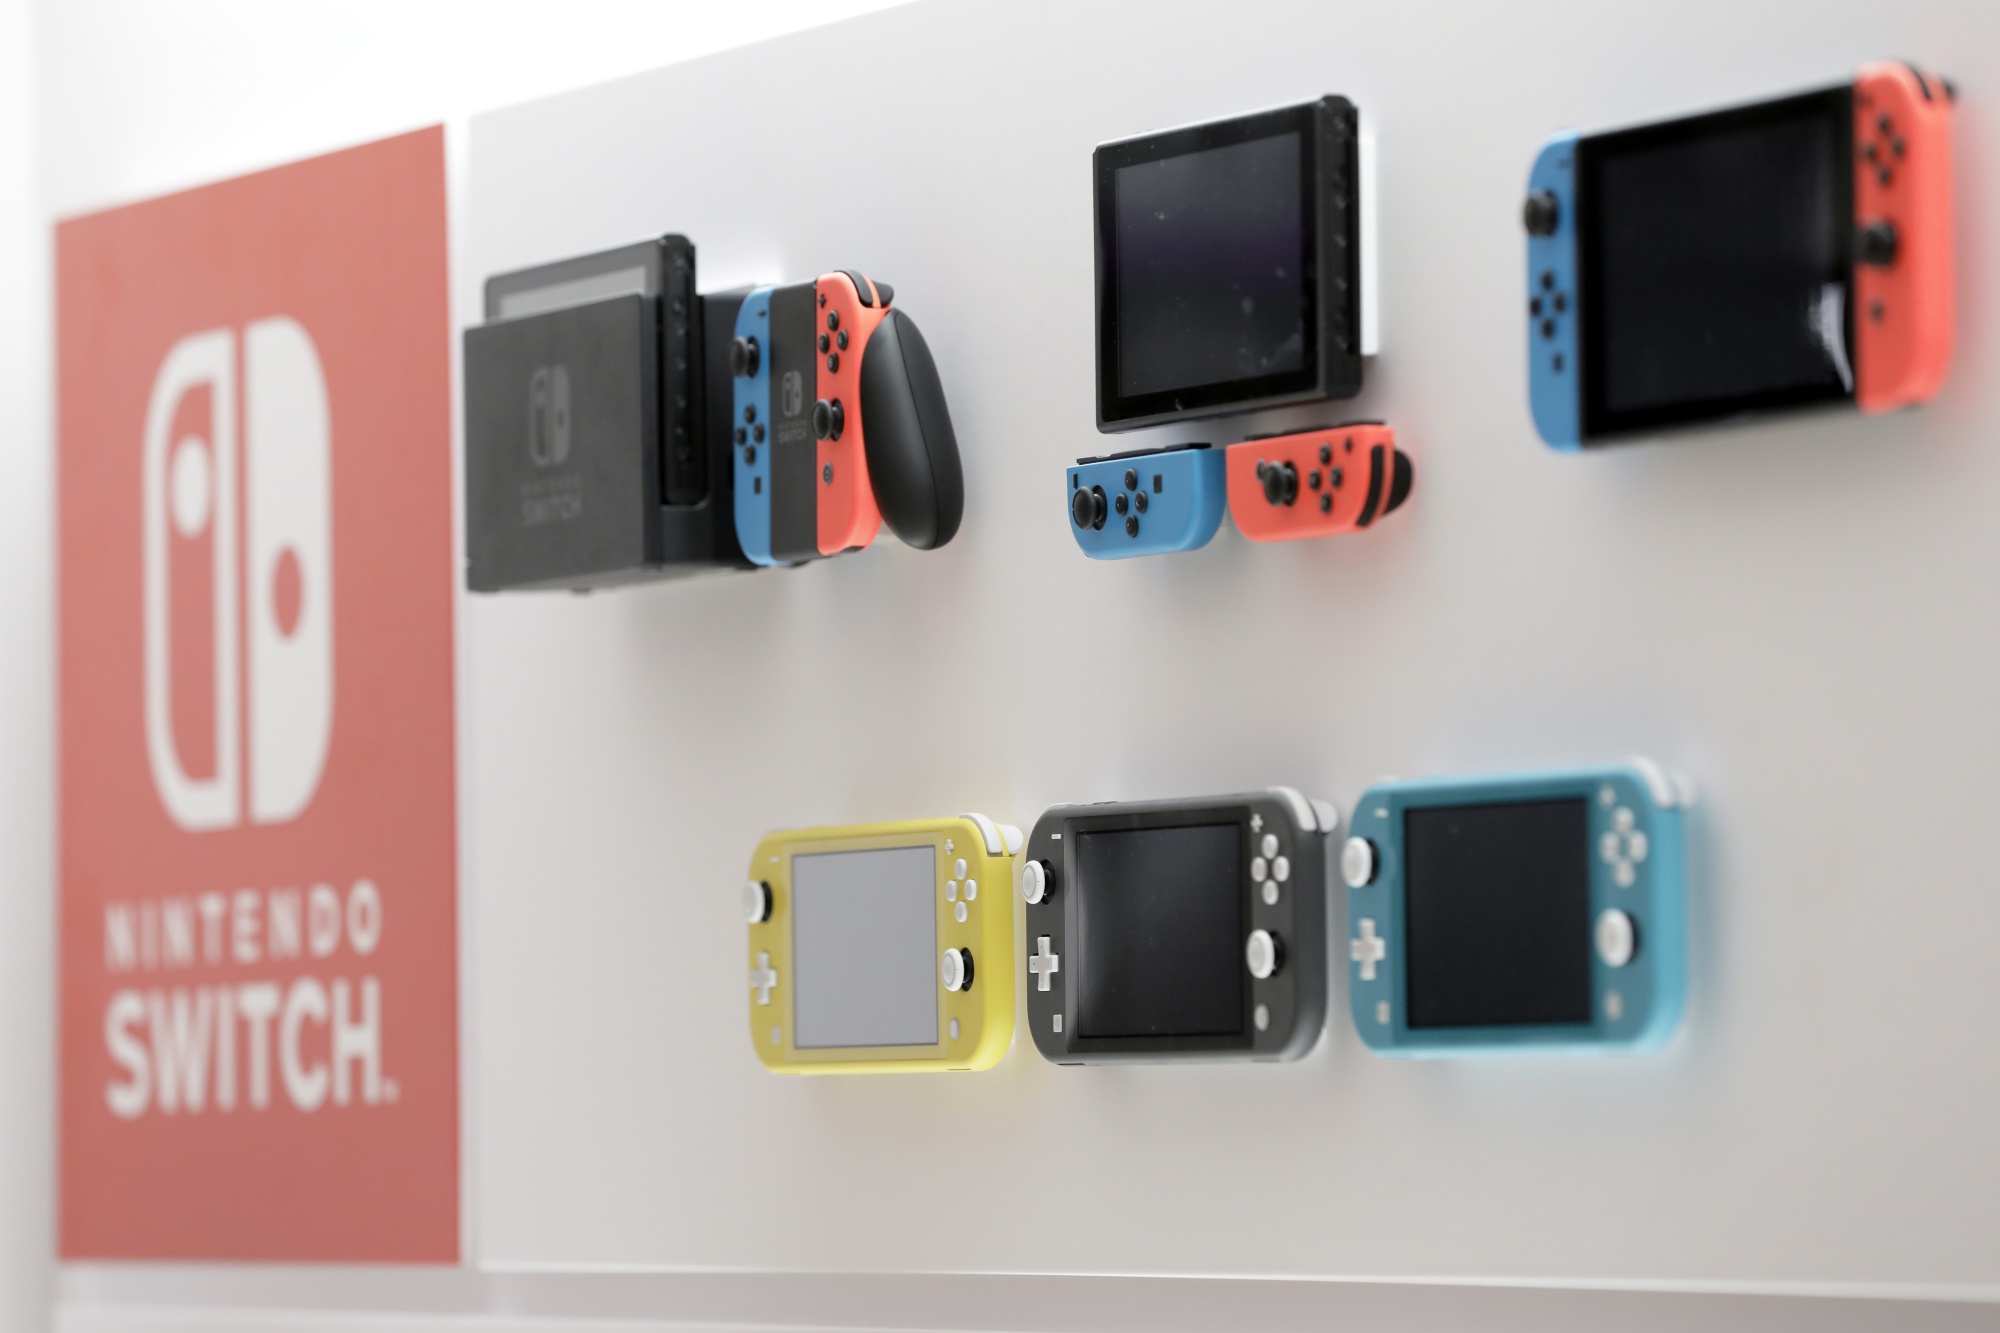 Margaret Mitchell afspejle statisk Nintendo Plans Upgraded Switch Replacement as Soon as September - Bloomberg